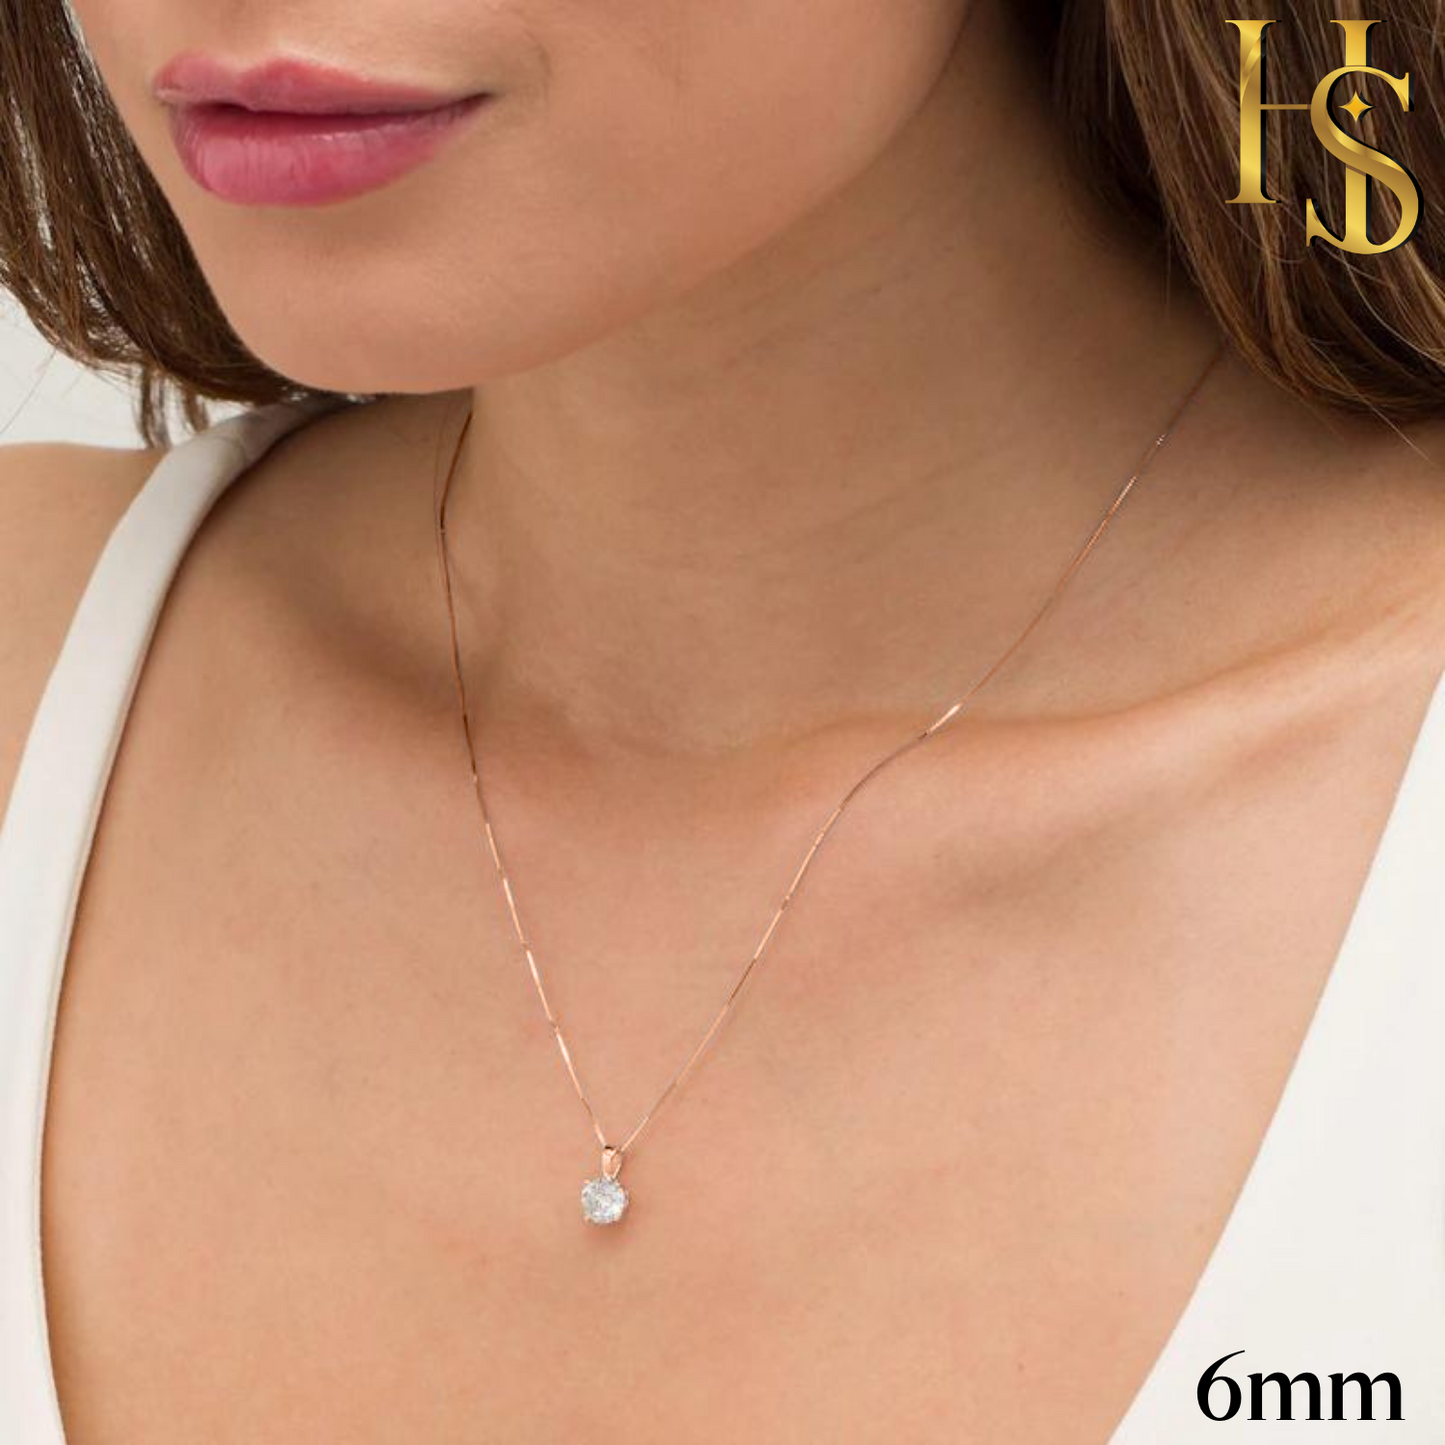 Solitaire Set - Round Earrings, Pendant & Chain in 92.5 Silver embellished with Swarovski Zirconia - 18K Rose Gold finish